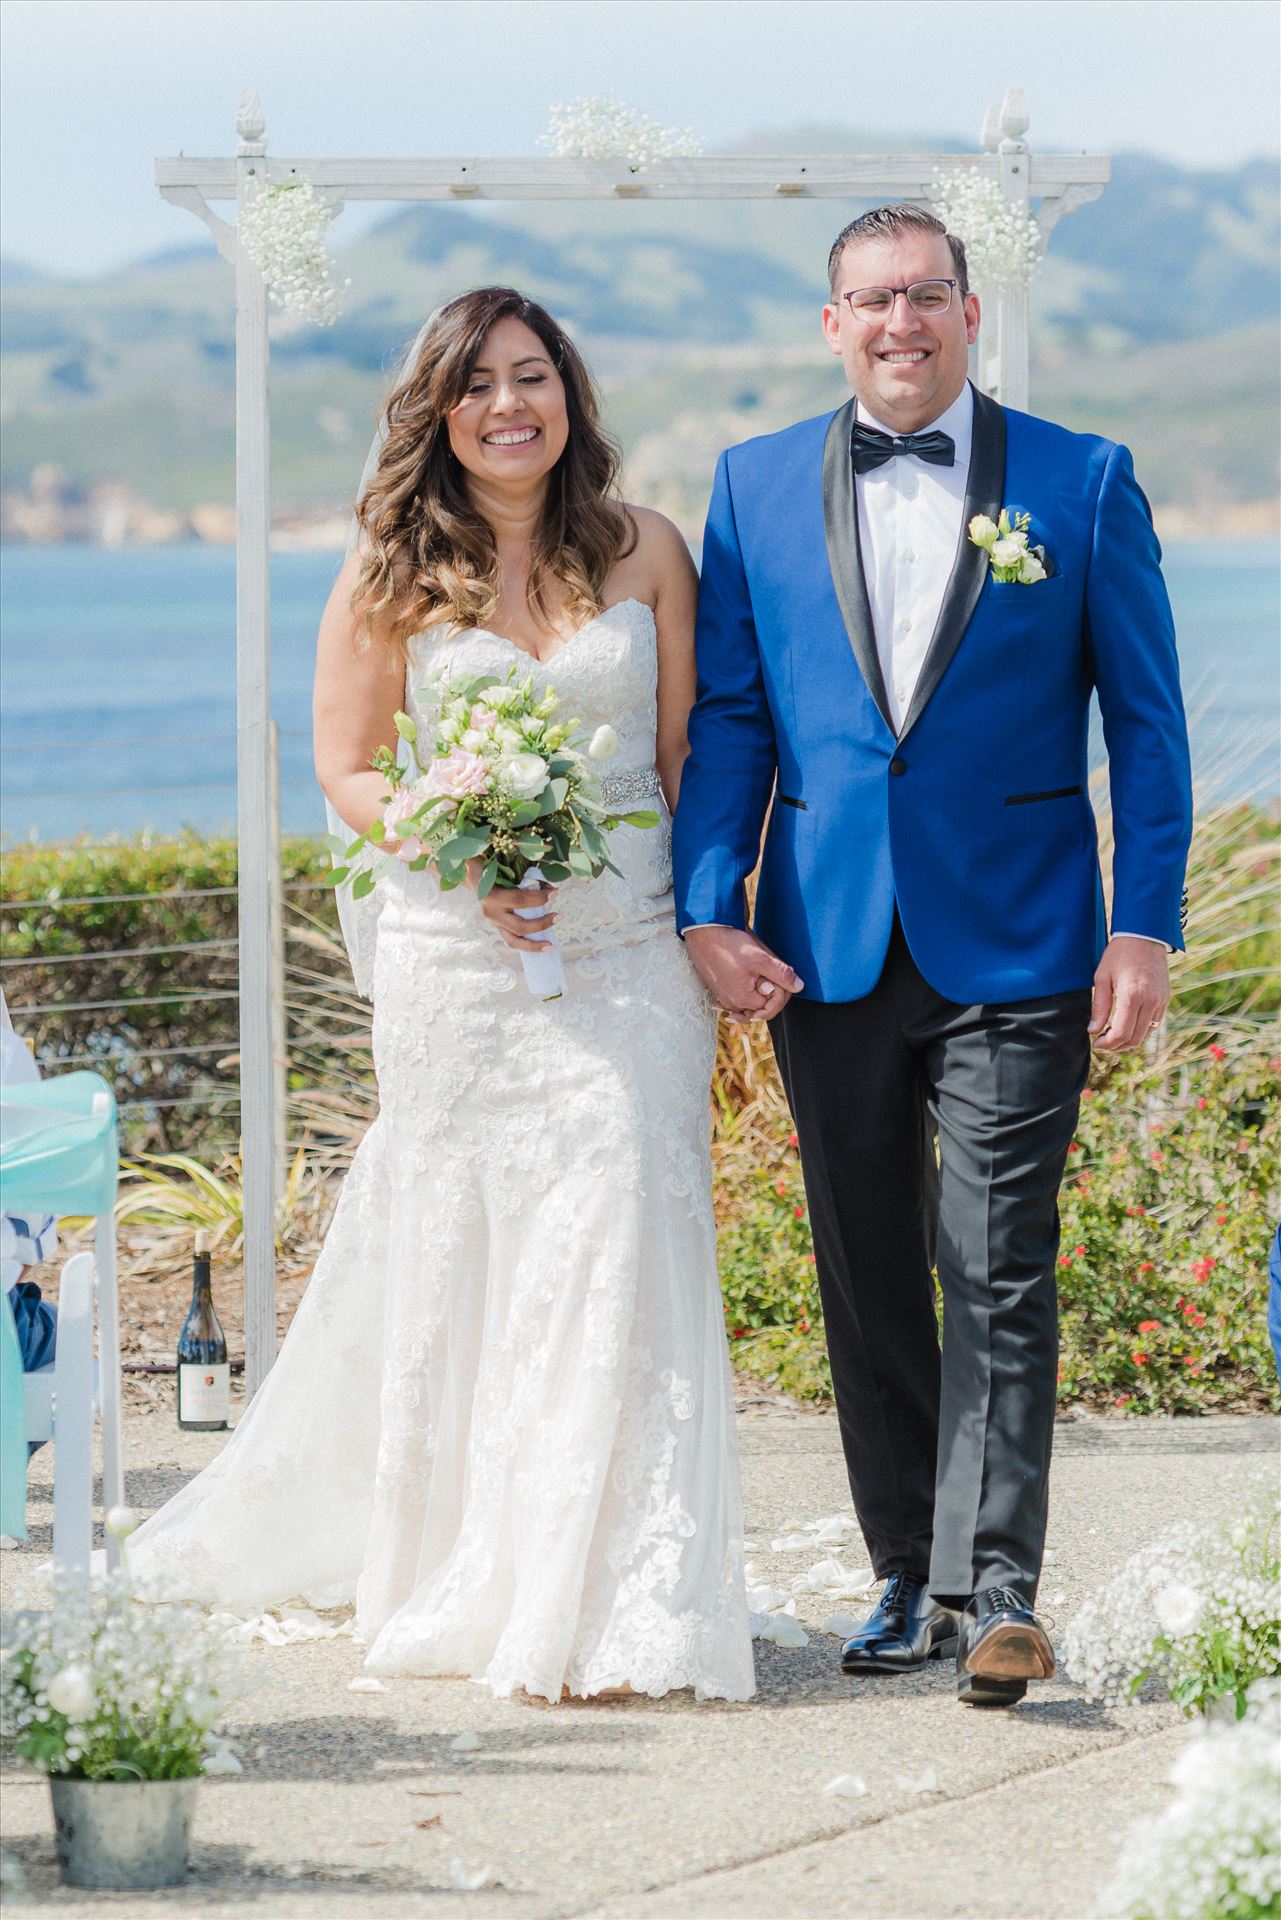 Candy and Christopher 19 - Wedding at Dolphin Bay Resort and Spa in Shell Beach, California by Sarah Williams of Mirror's Edge Photography, a San Luis Obispo County Wedding Photographer. Ceremony at Spyglass in Shell Beach, California by Sarah Williams